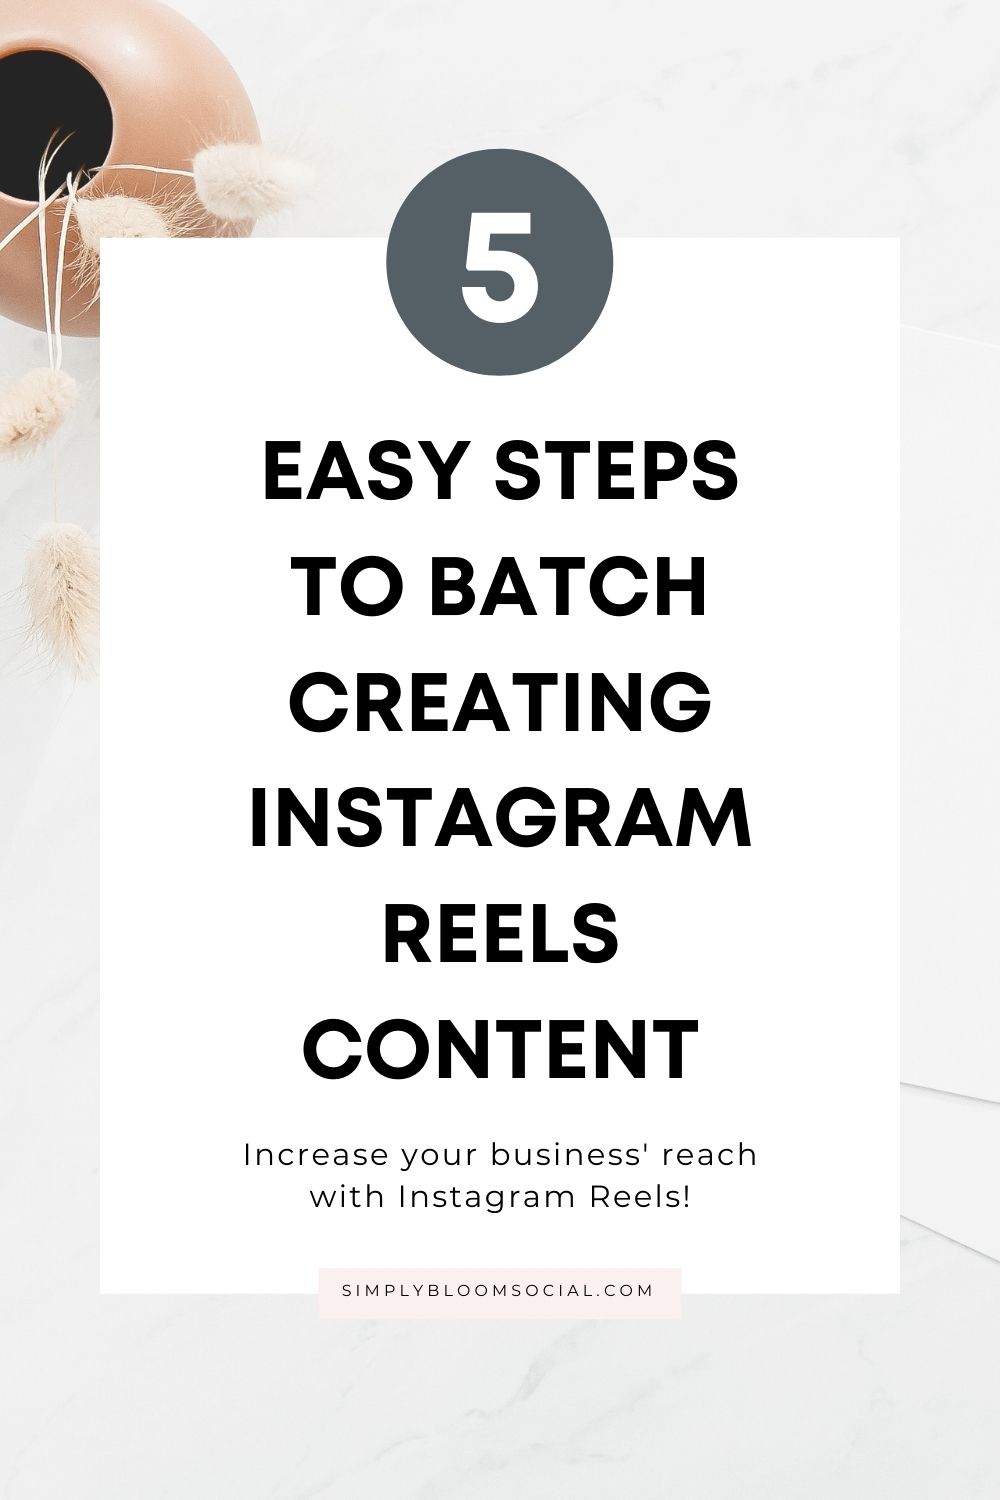 5 easy steps to batch creating instagram reels content